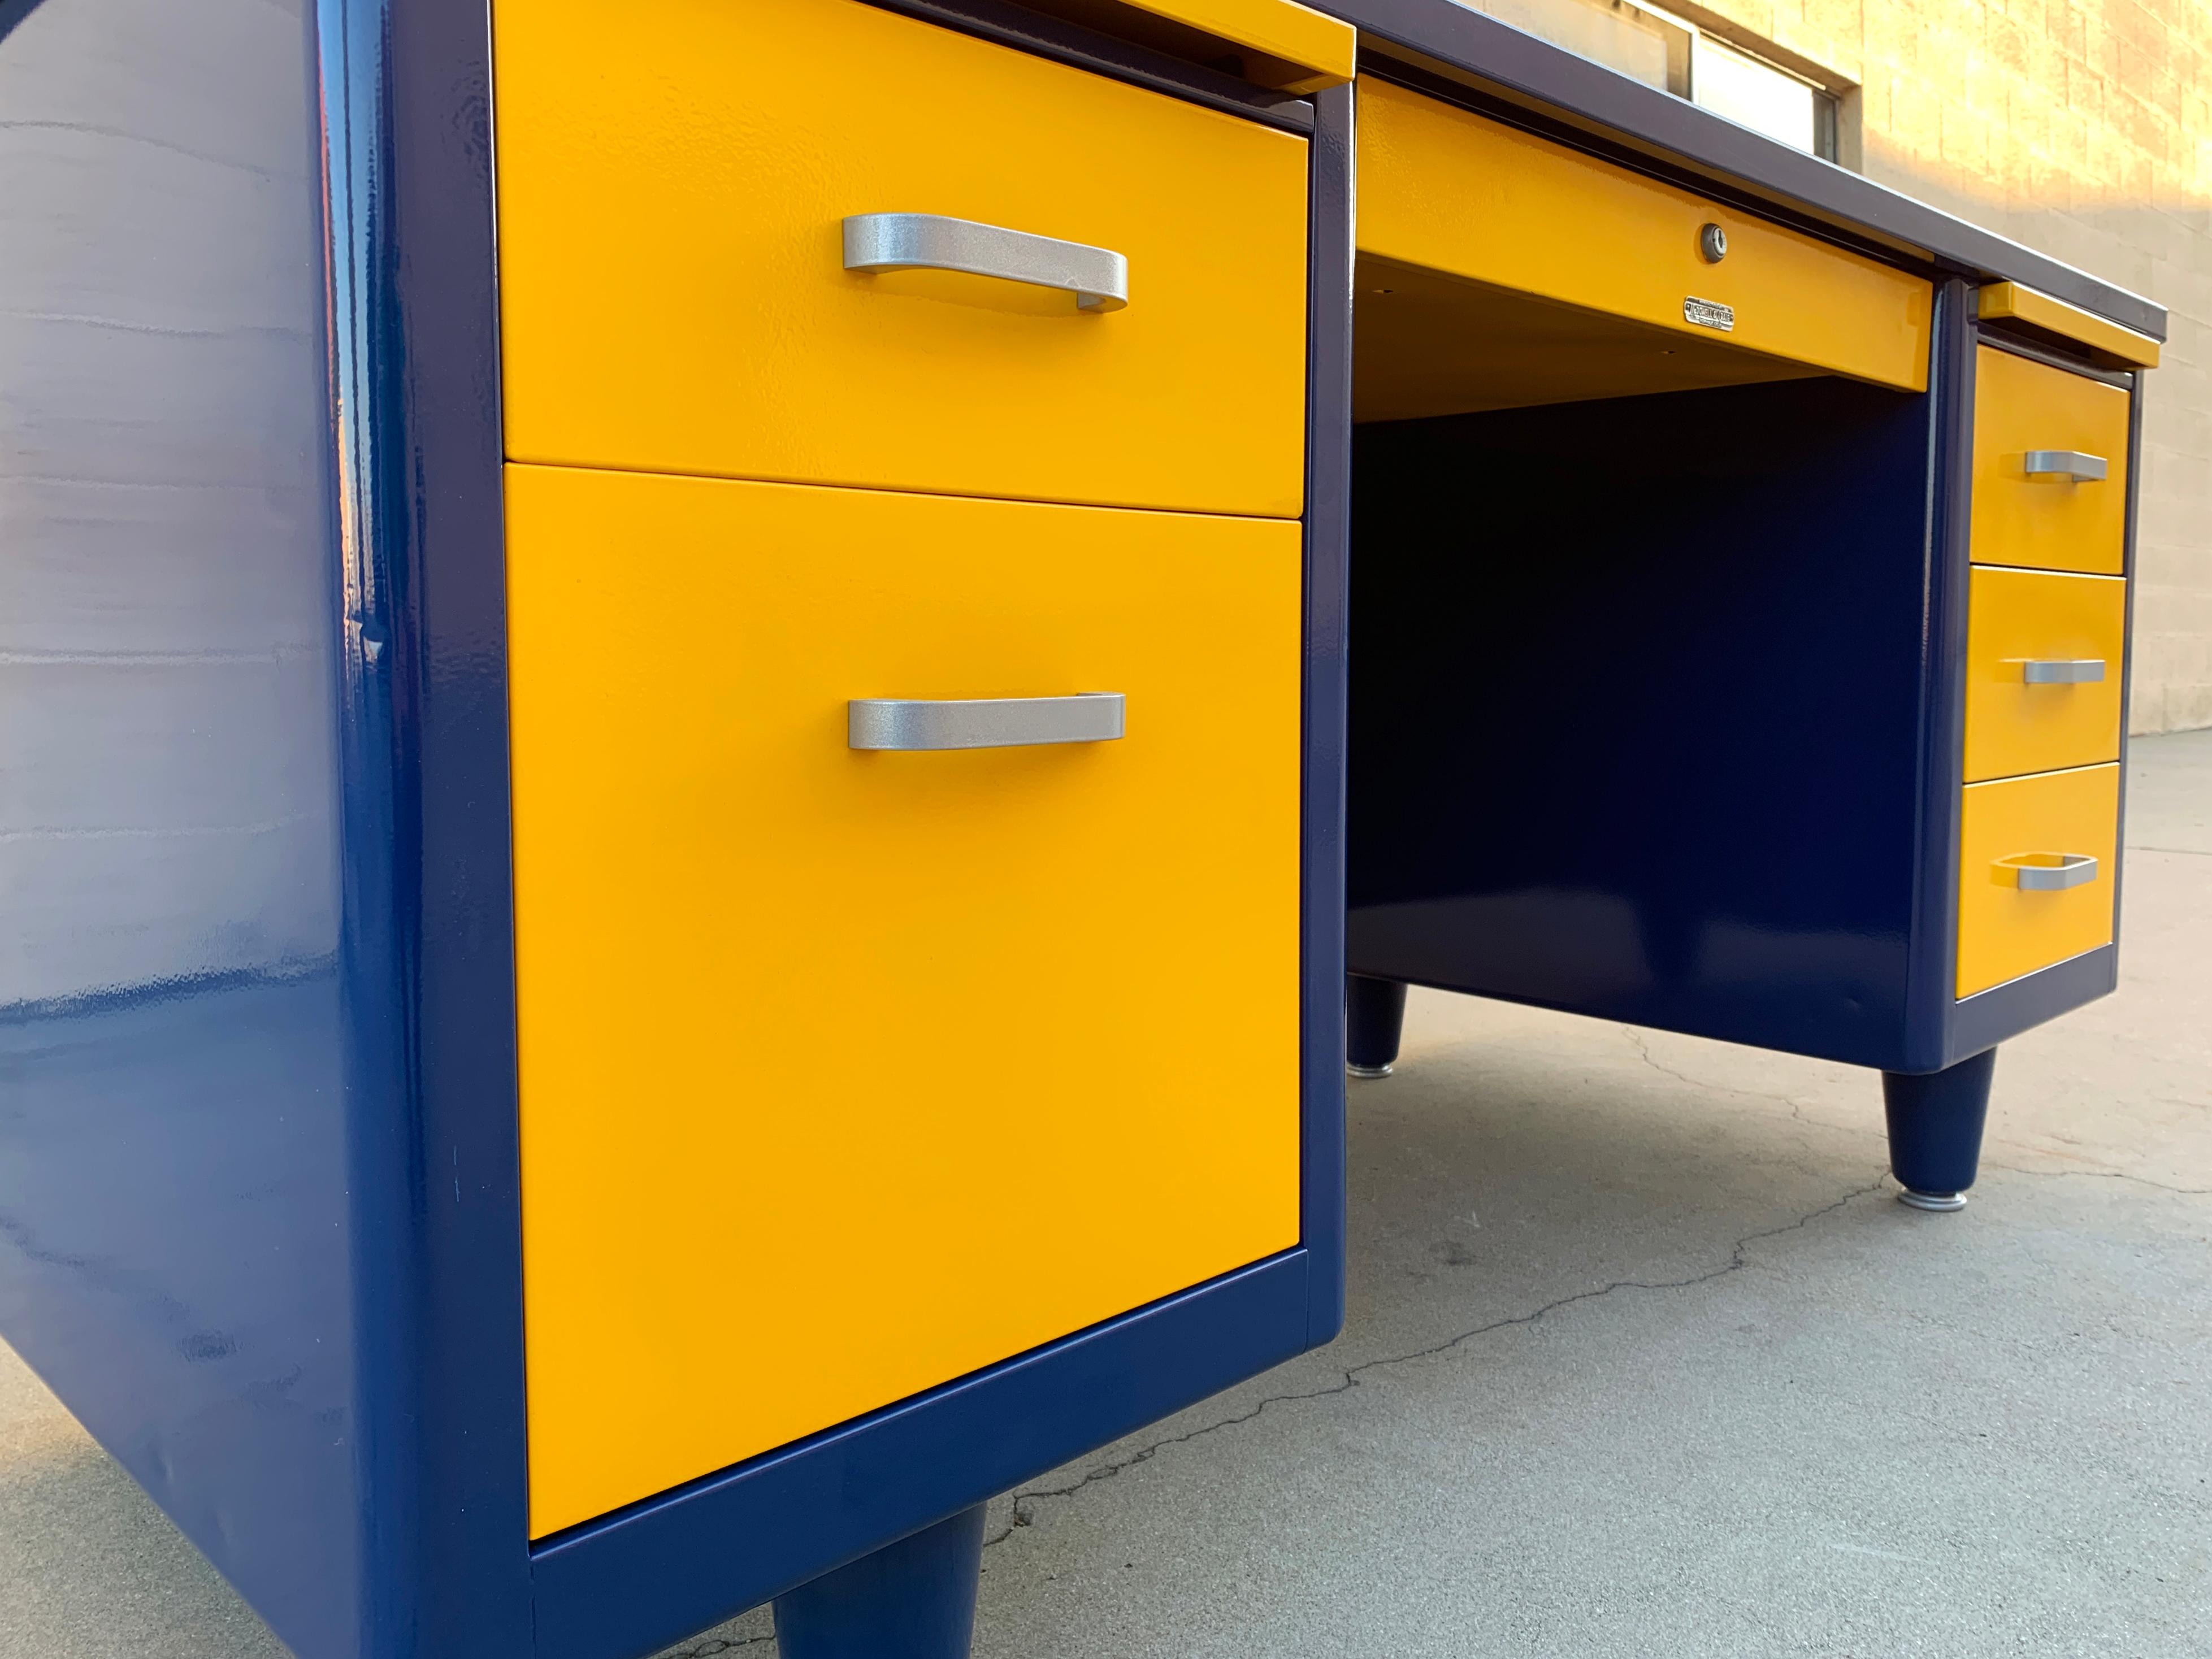 McDowell Craig Midcentury Tanker Desk Refinished in Blue and Yellow In Good Condition For Sale In Alhambra, CA